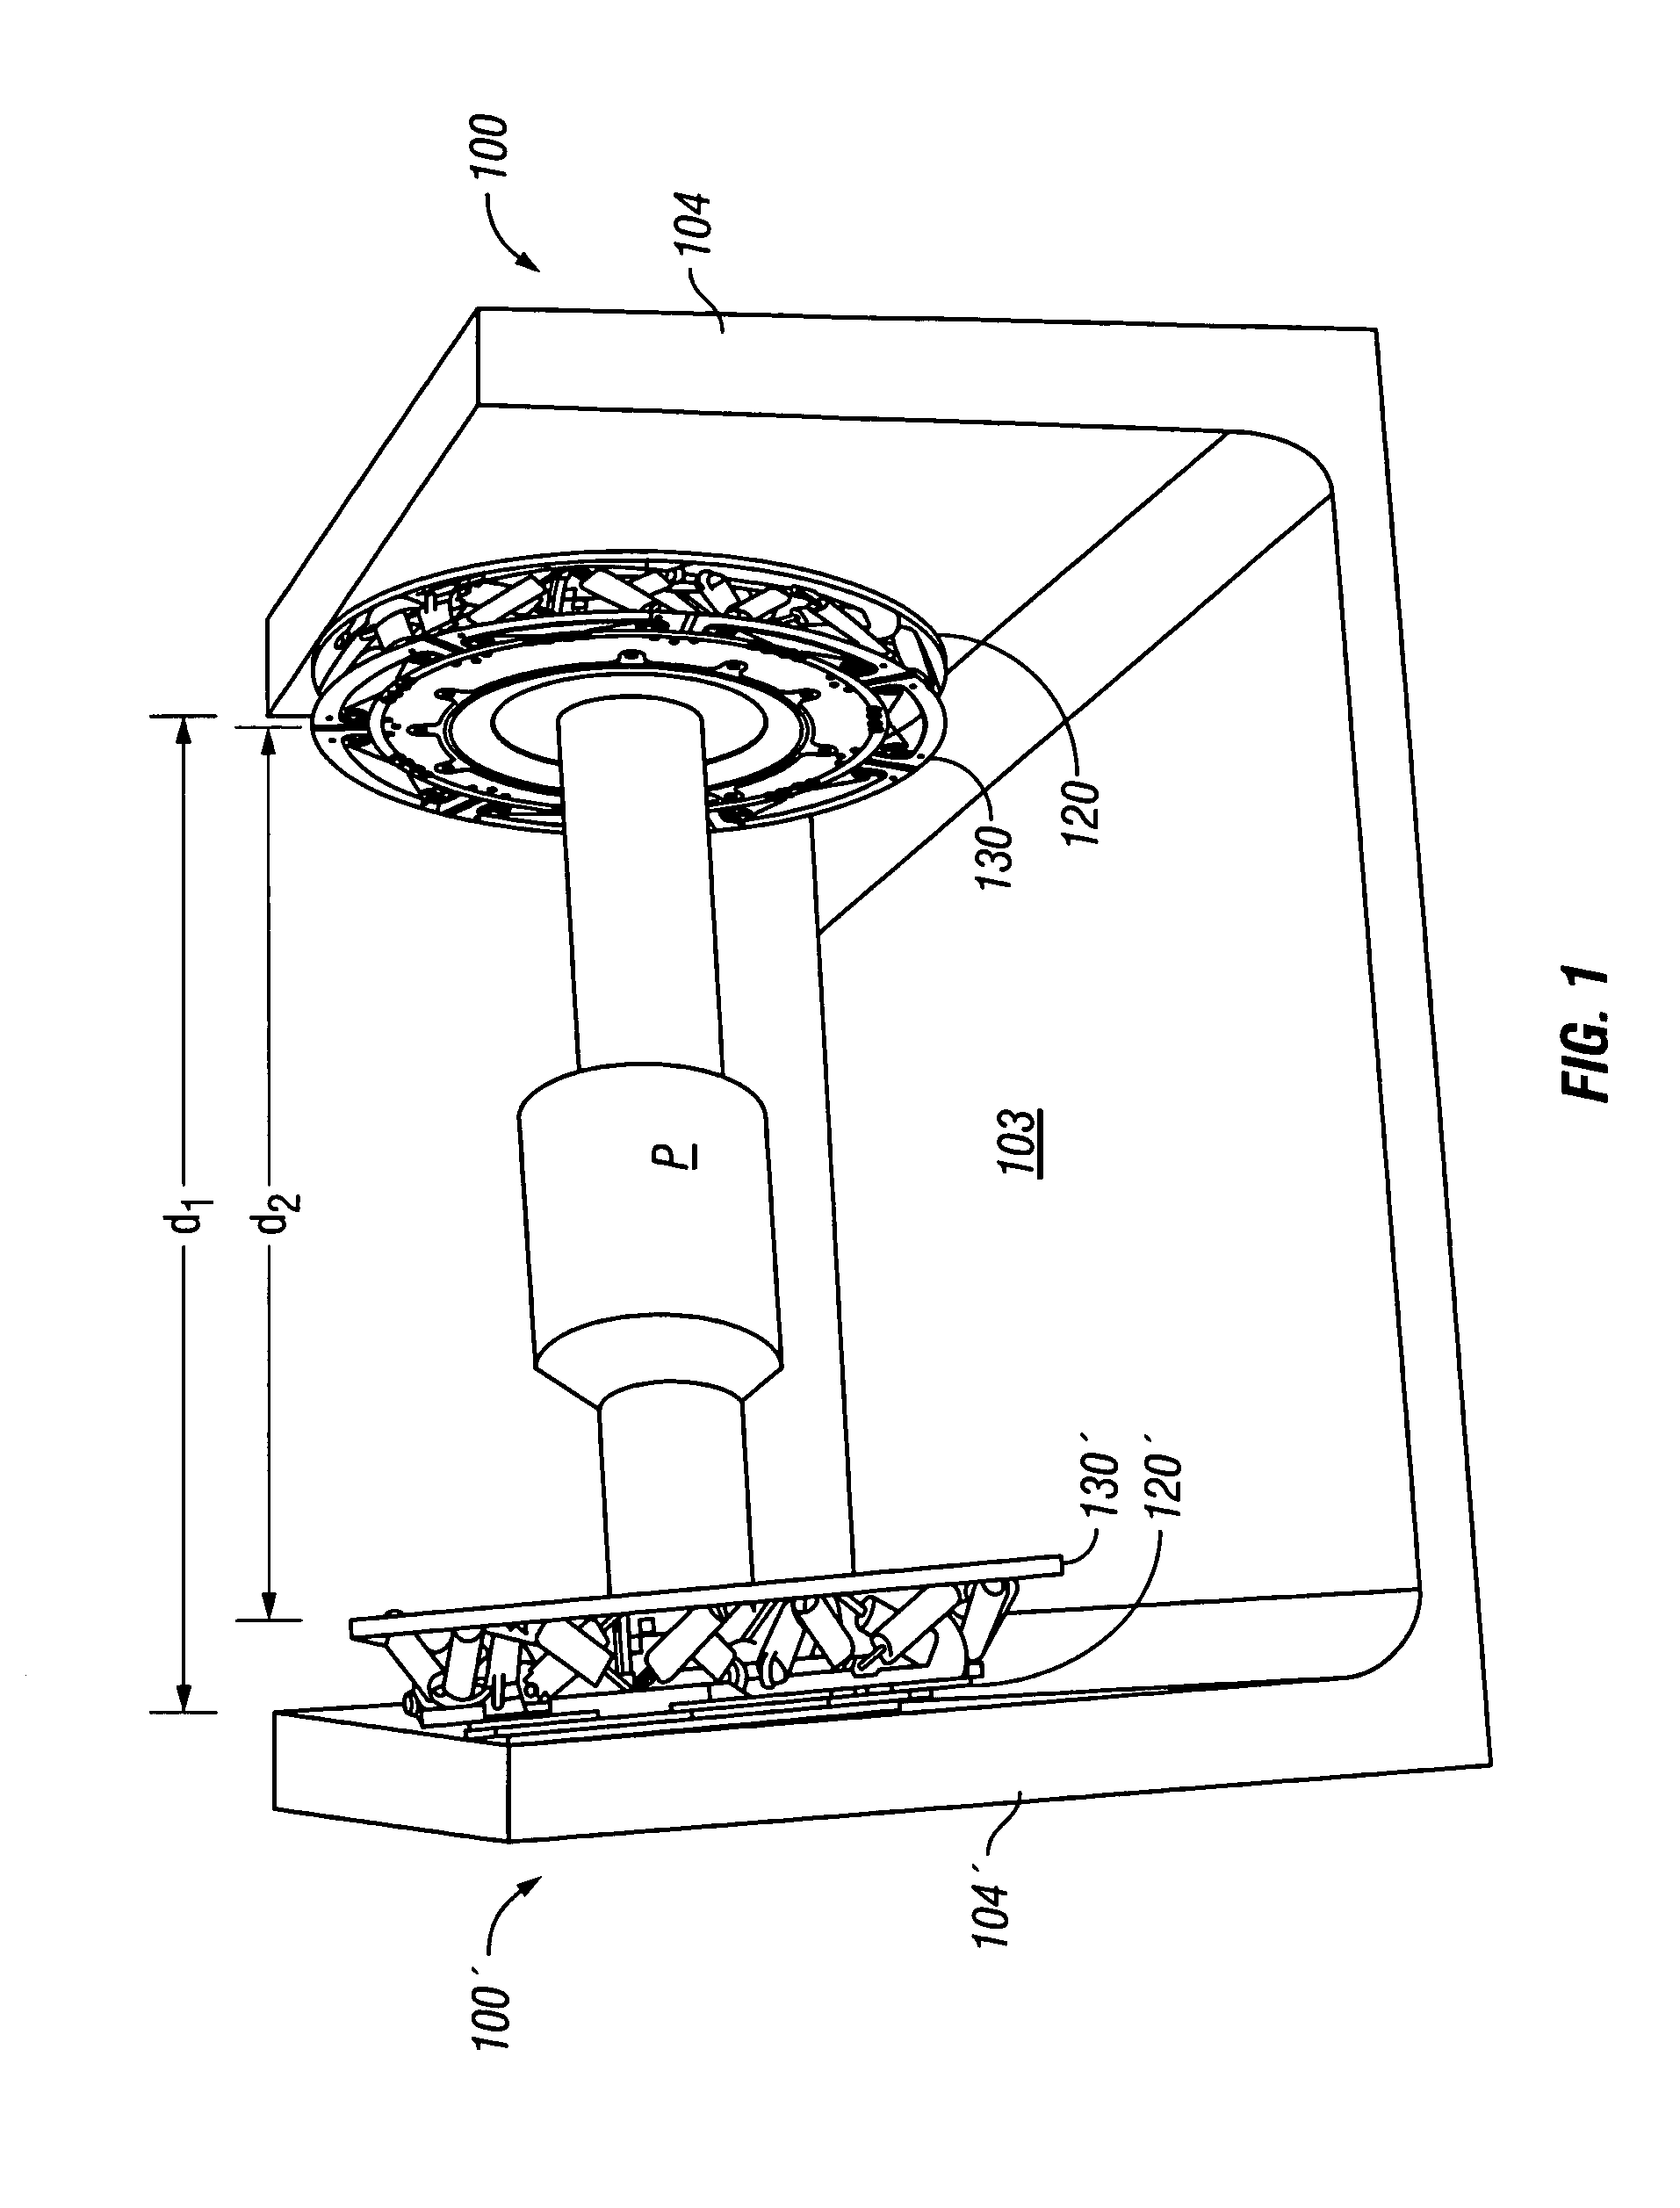 Three-axis offset damping system